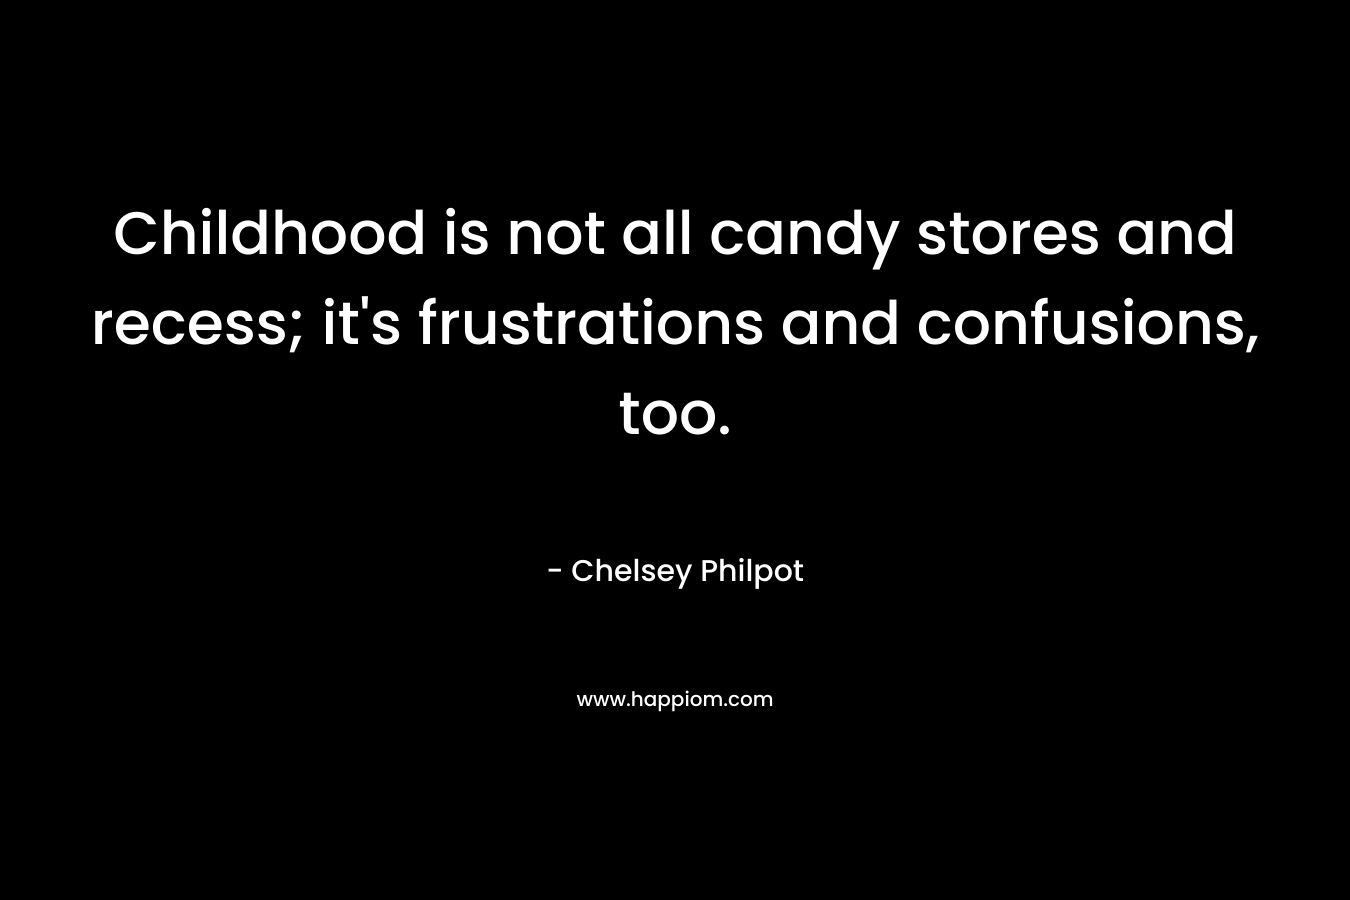 Childhood is not all candy stores and recess; it's frustrations and confusions, too.